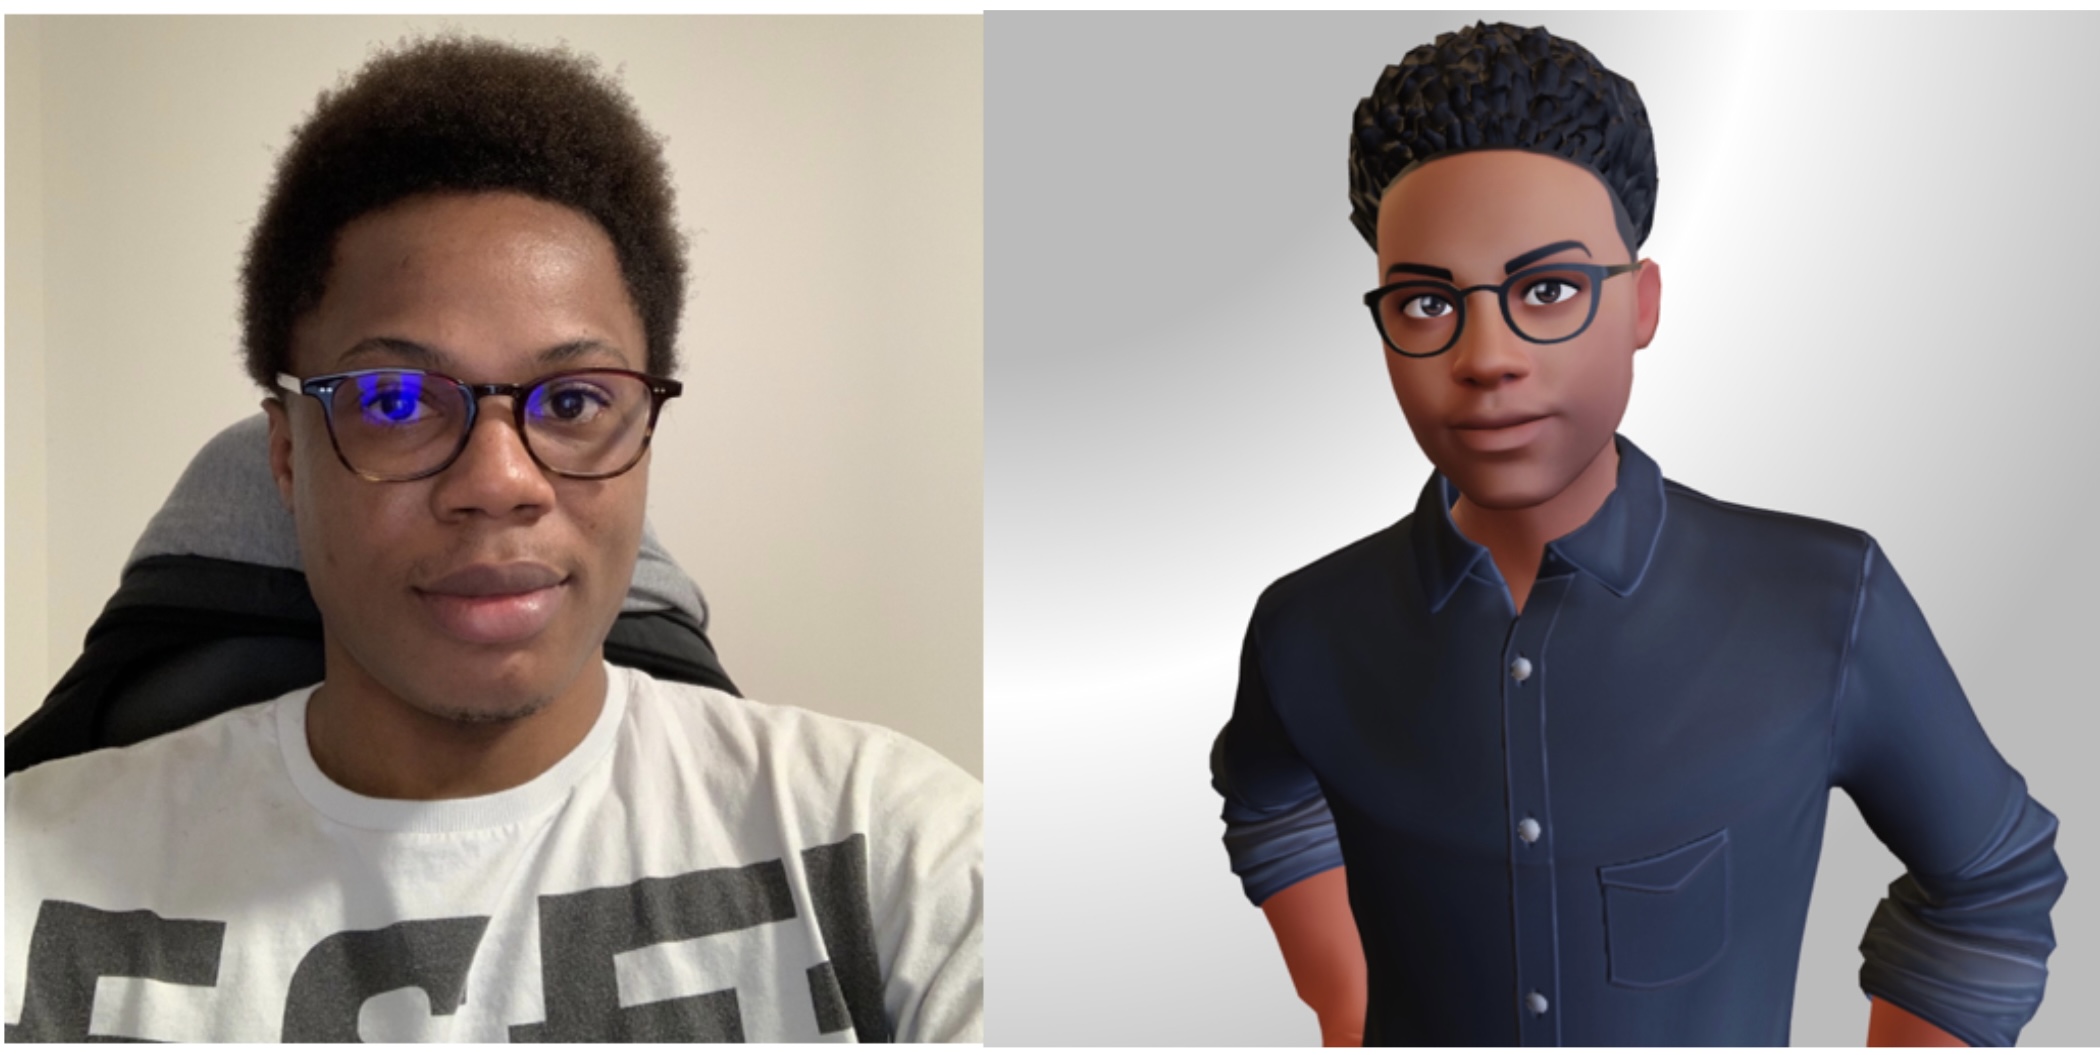 VR Chat Avatar Creator Commits To Fixes  New Options For Better  Representation